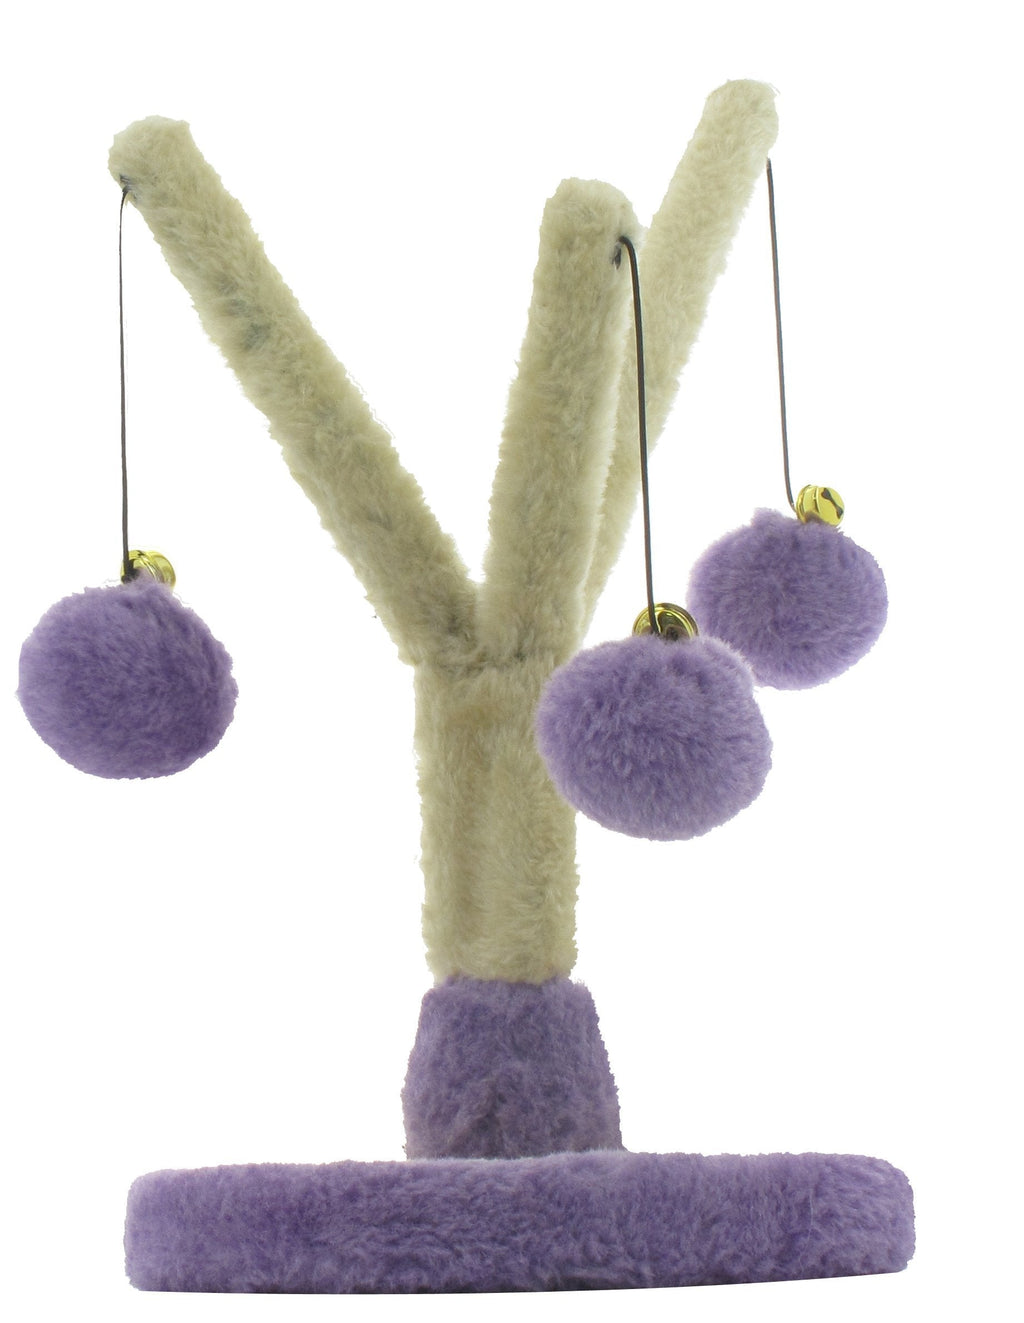 [Australia] - Penn Plax Cat Tree Activity Center with 3 Plush Hanging Cat Toys, 12 Inches High 